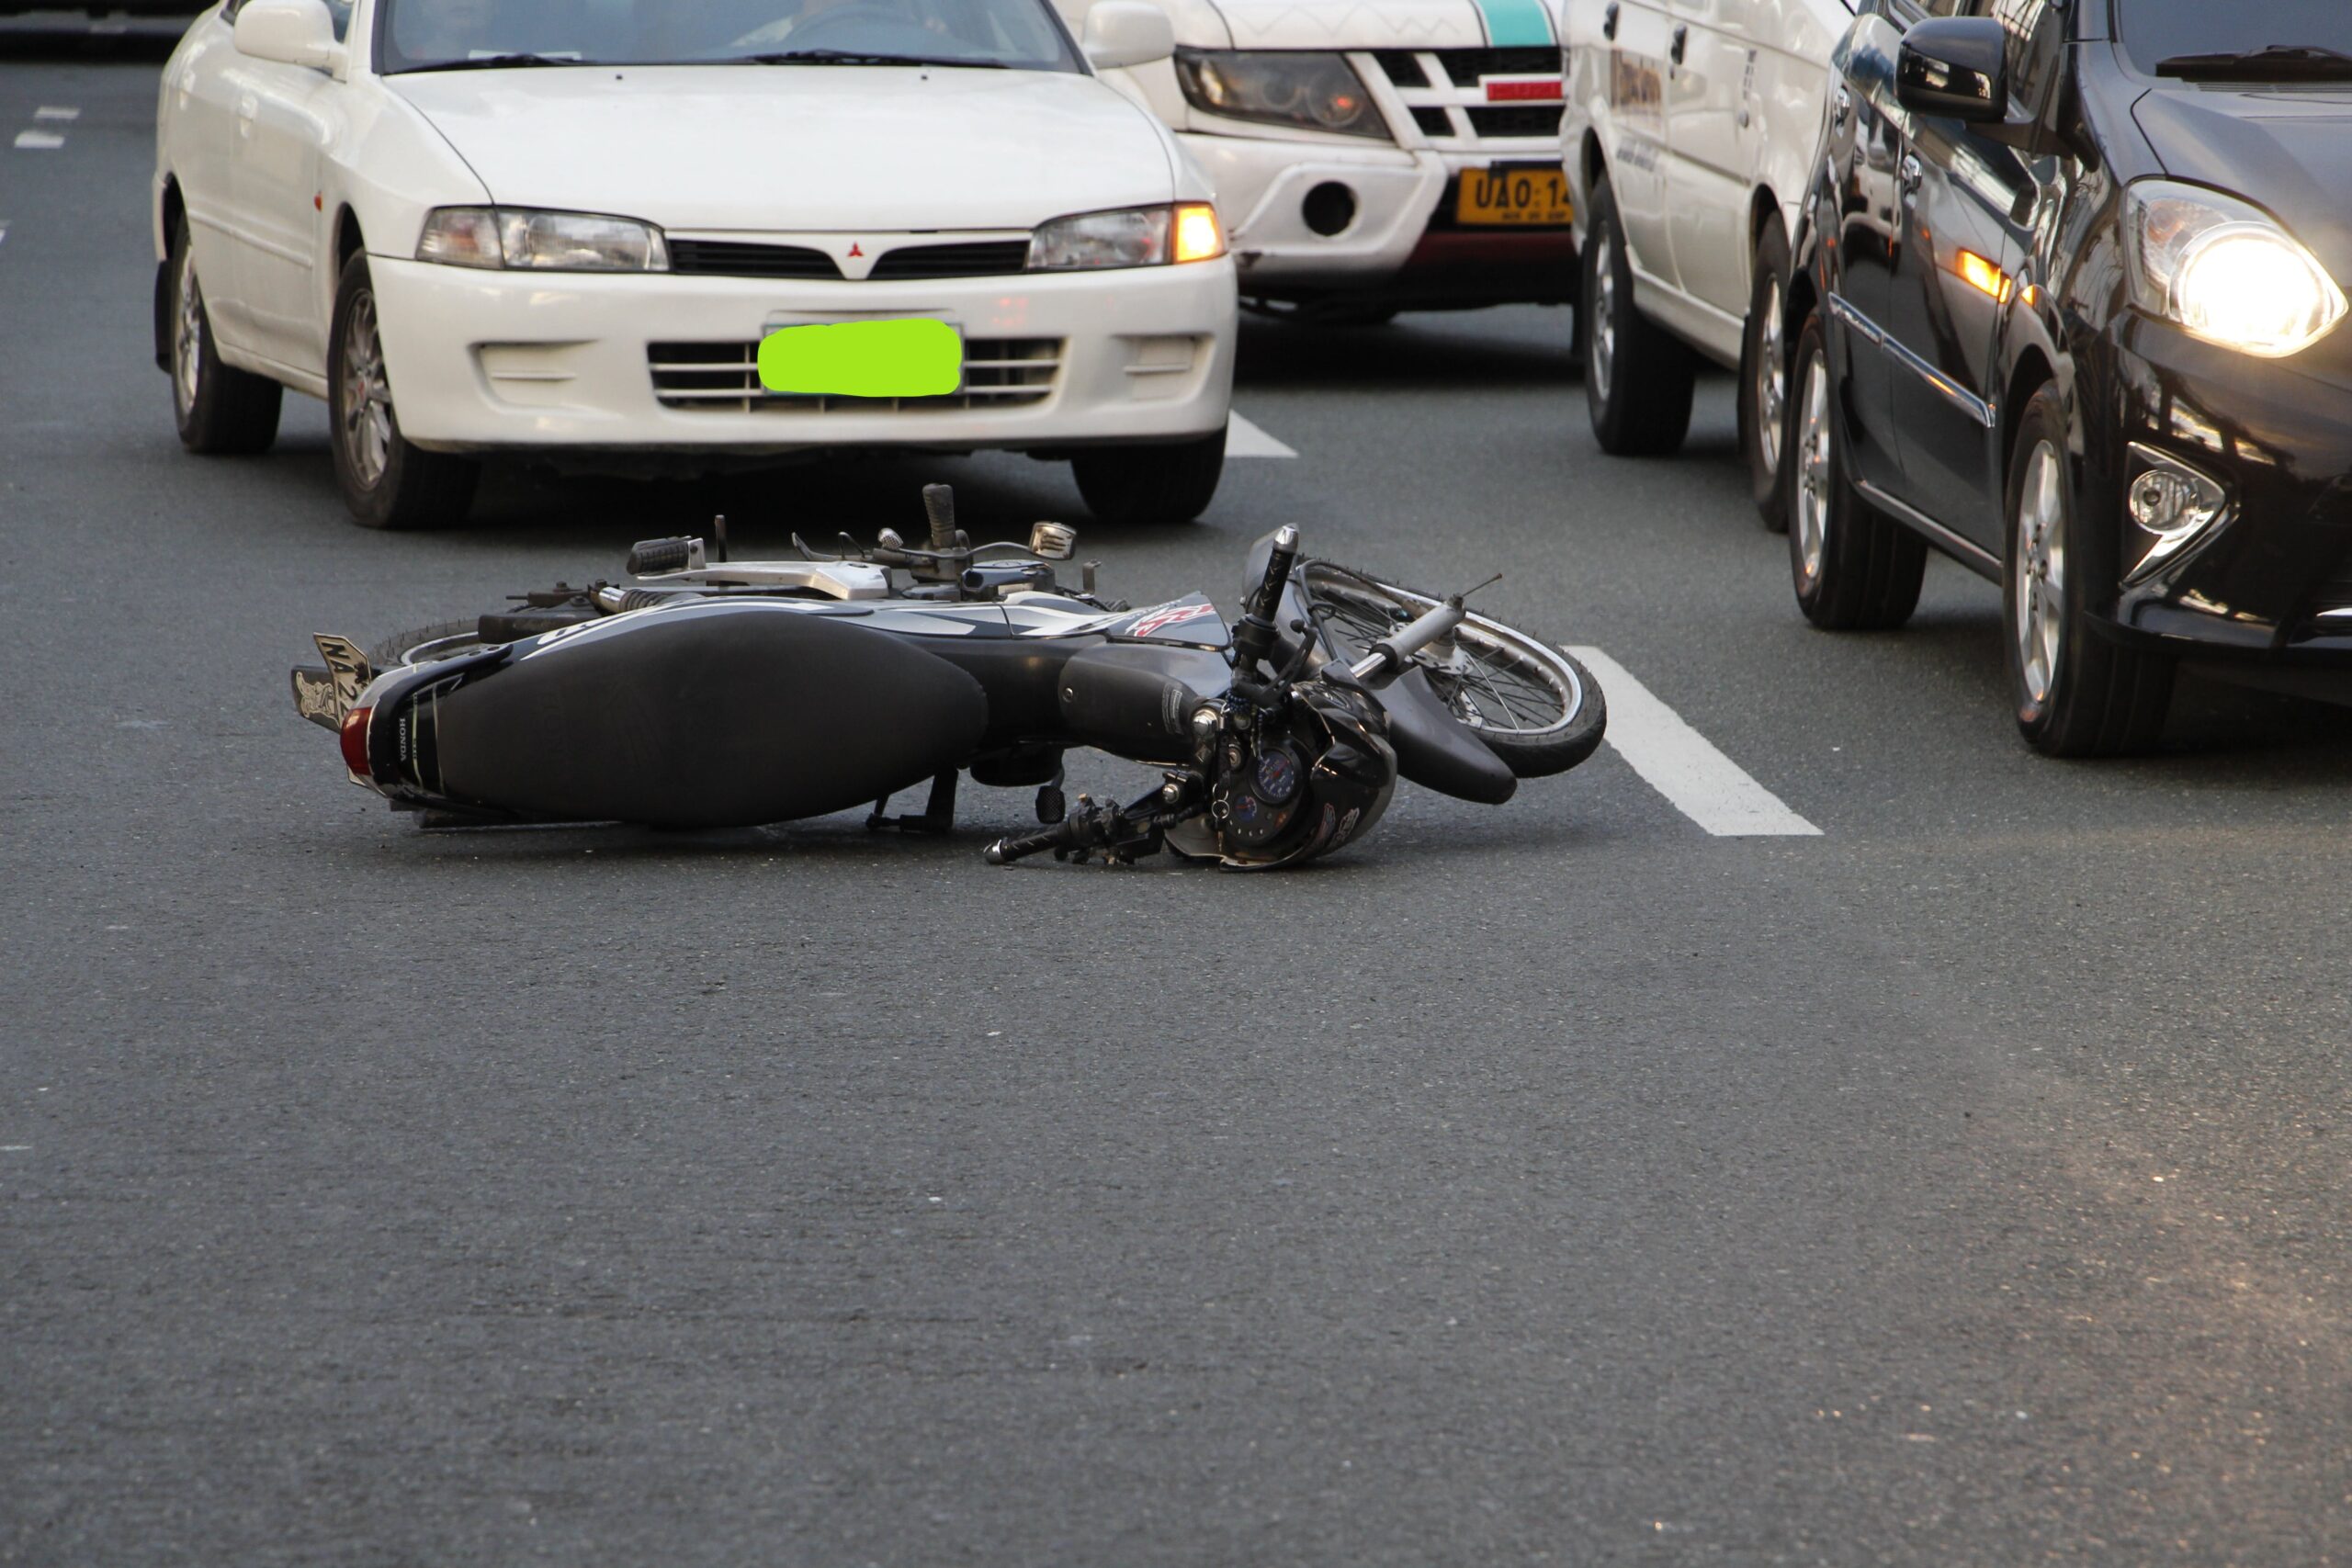 Motorcycle Police Accidents Legal Frameworks and Public Safety